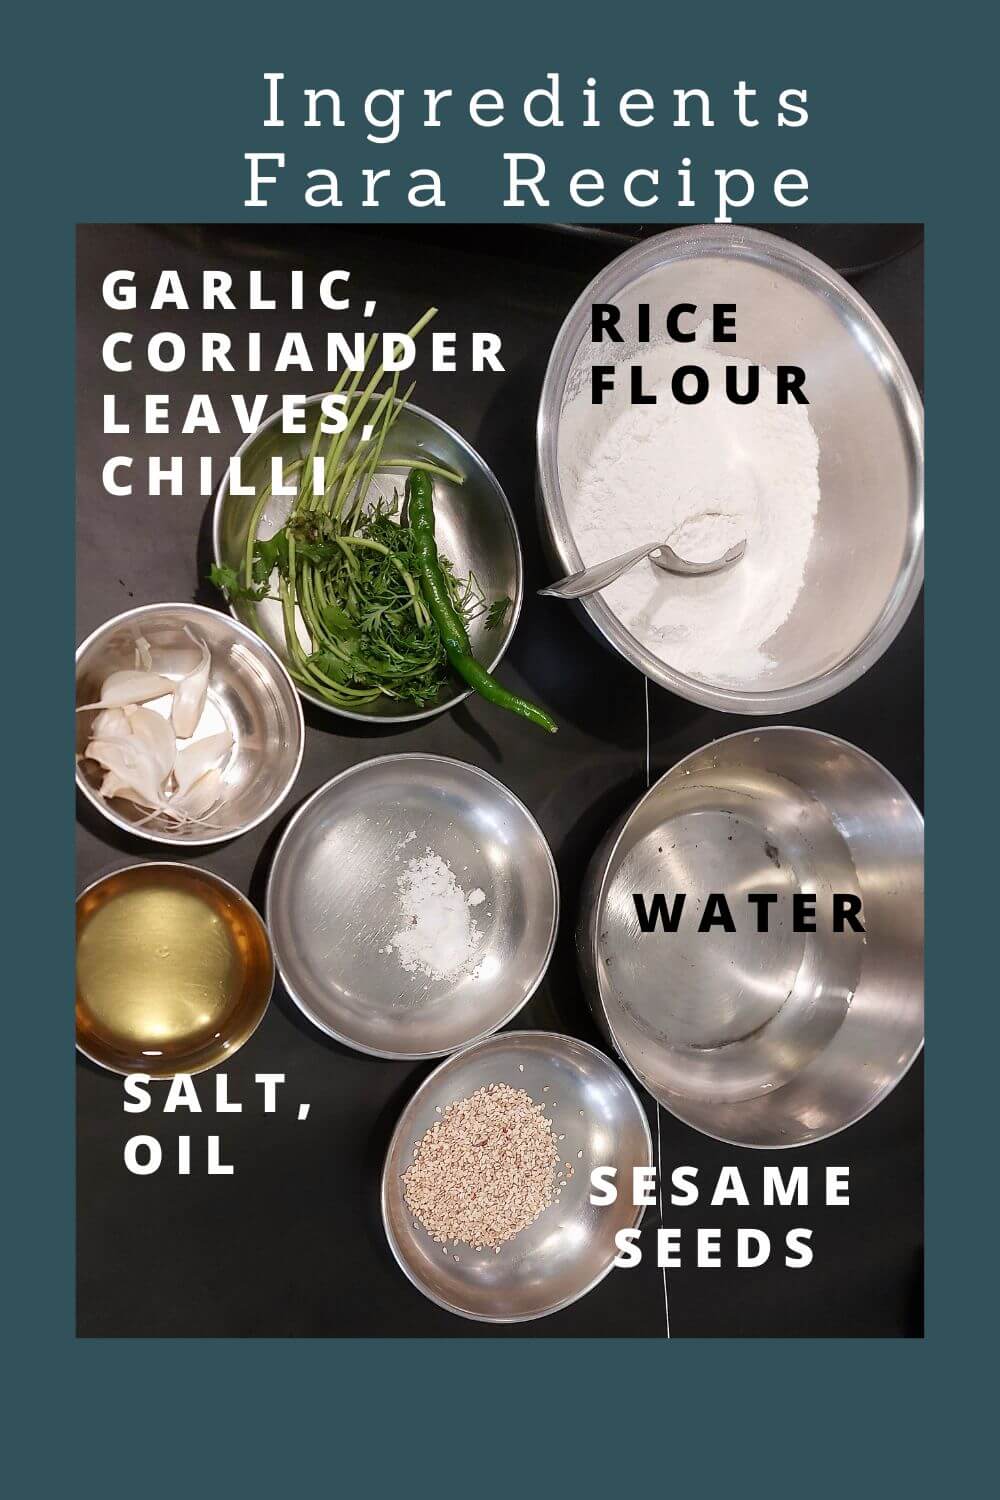 The ingredients I used for making Fara are rice flour, water, sesame seeds, salt, oil, coriander leaves, garlic and green chillies